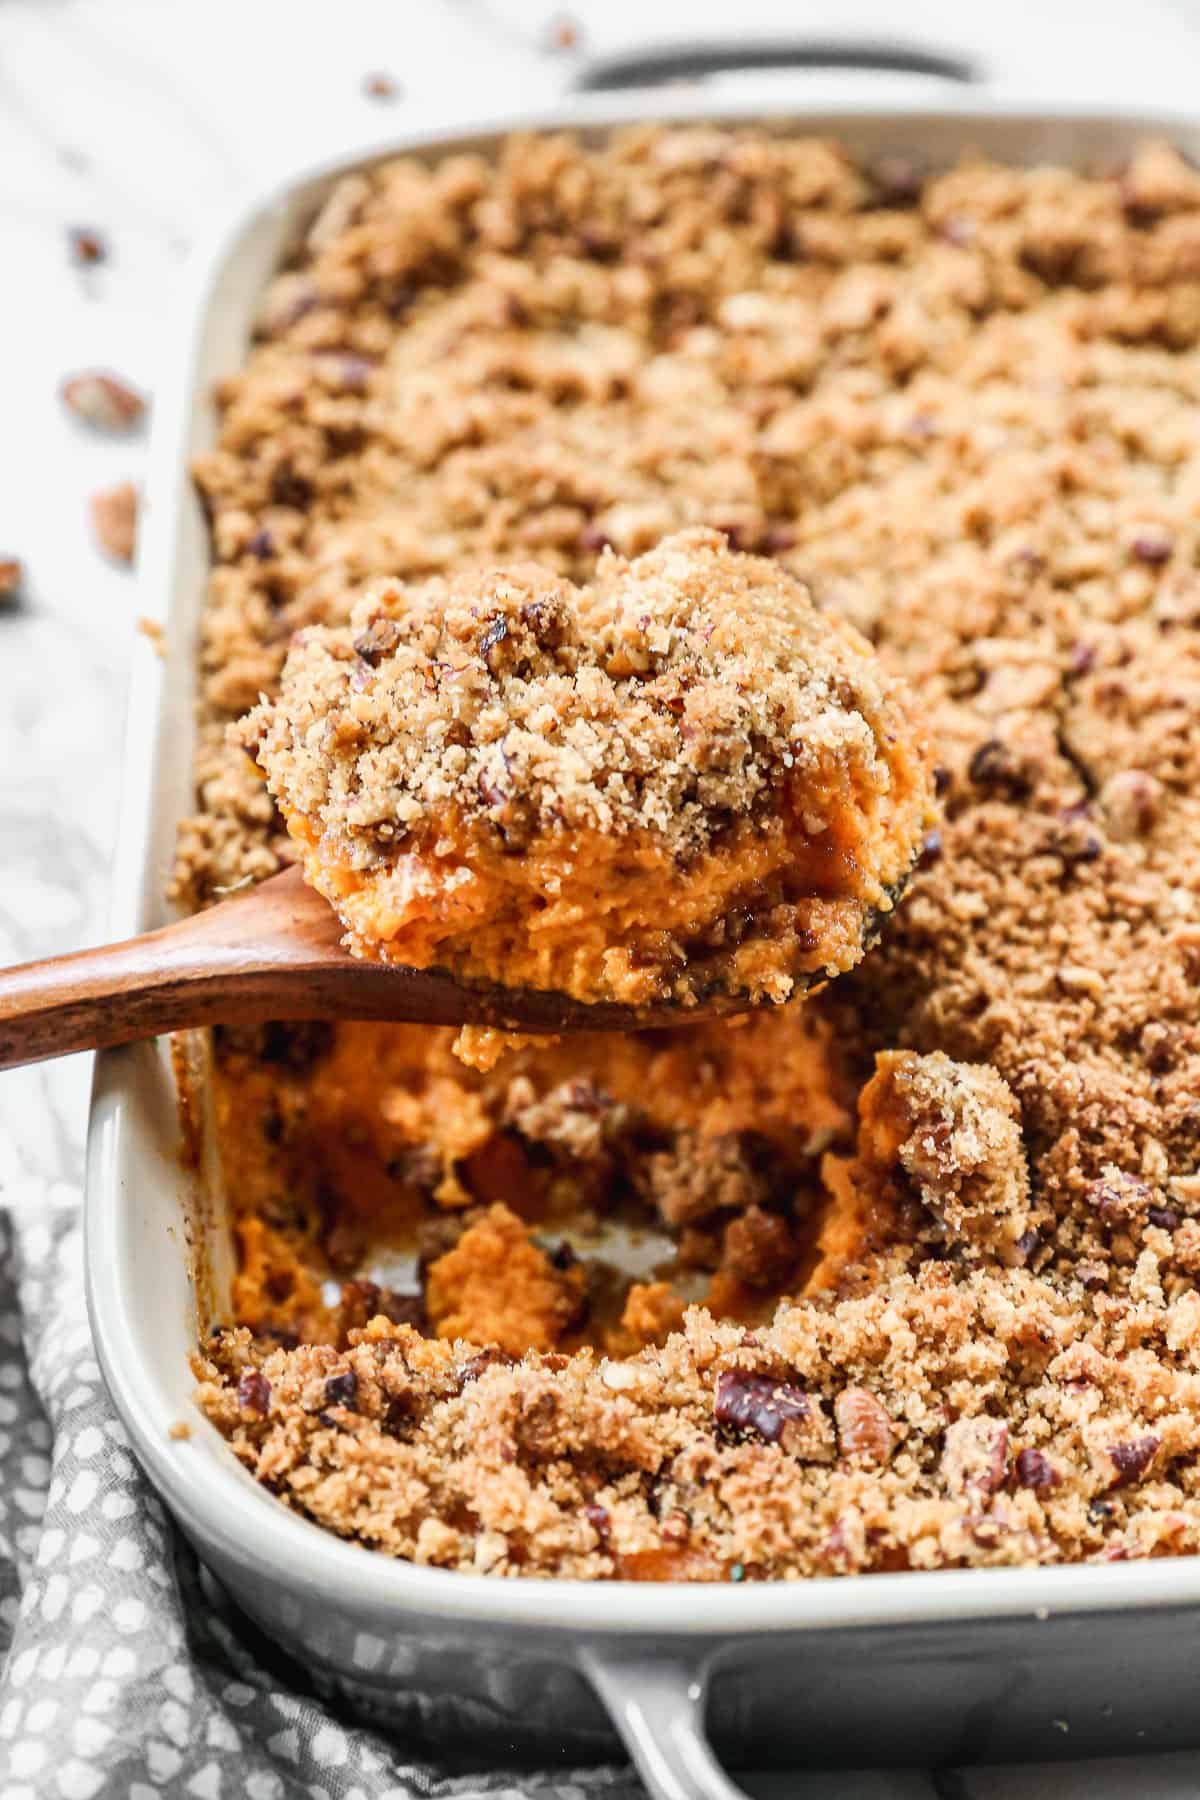 A piece of the best Sweet Potato Casserole recipe being lifted out of a rectangle pan to serve.